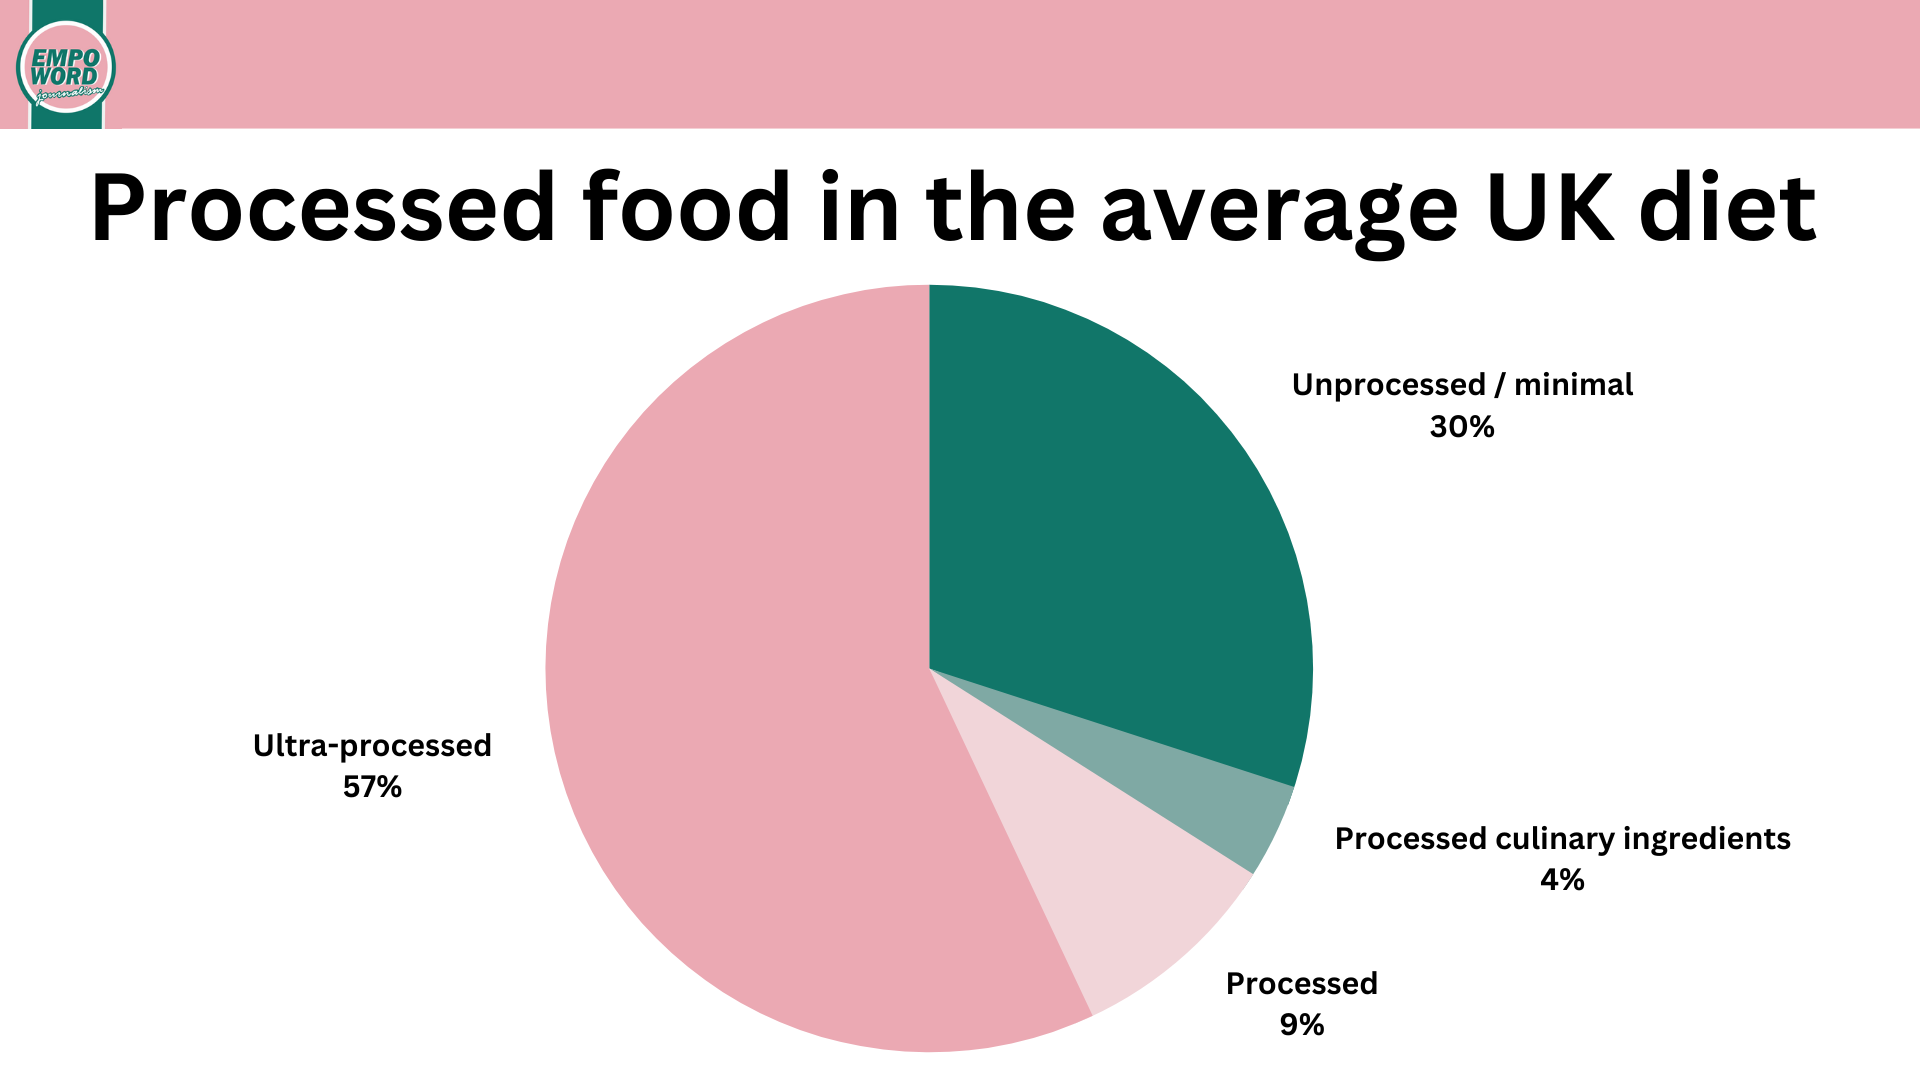 A pie chart showing processed food percentages in the average UK diet.Unprocessed/minial processed: 30% Processed culinary ingredients: 4% Processed: 9% Ultra processed: 57%